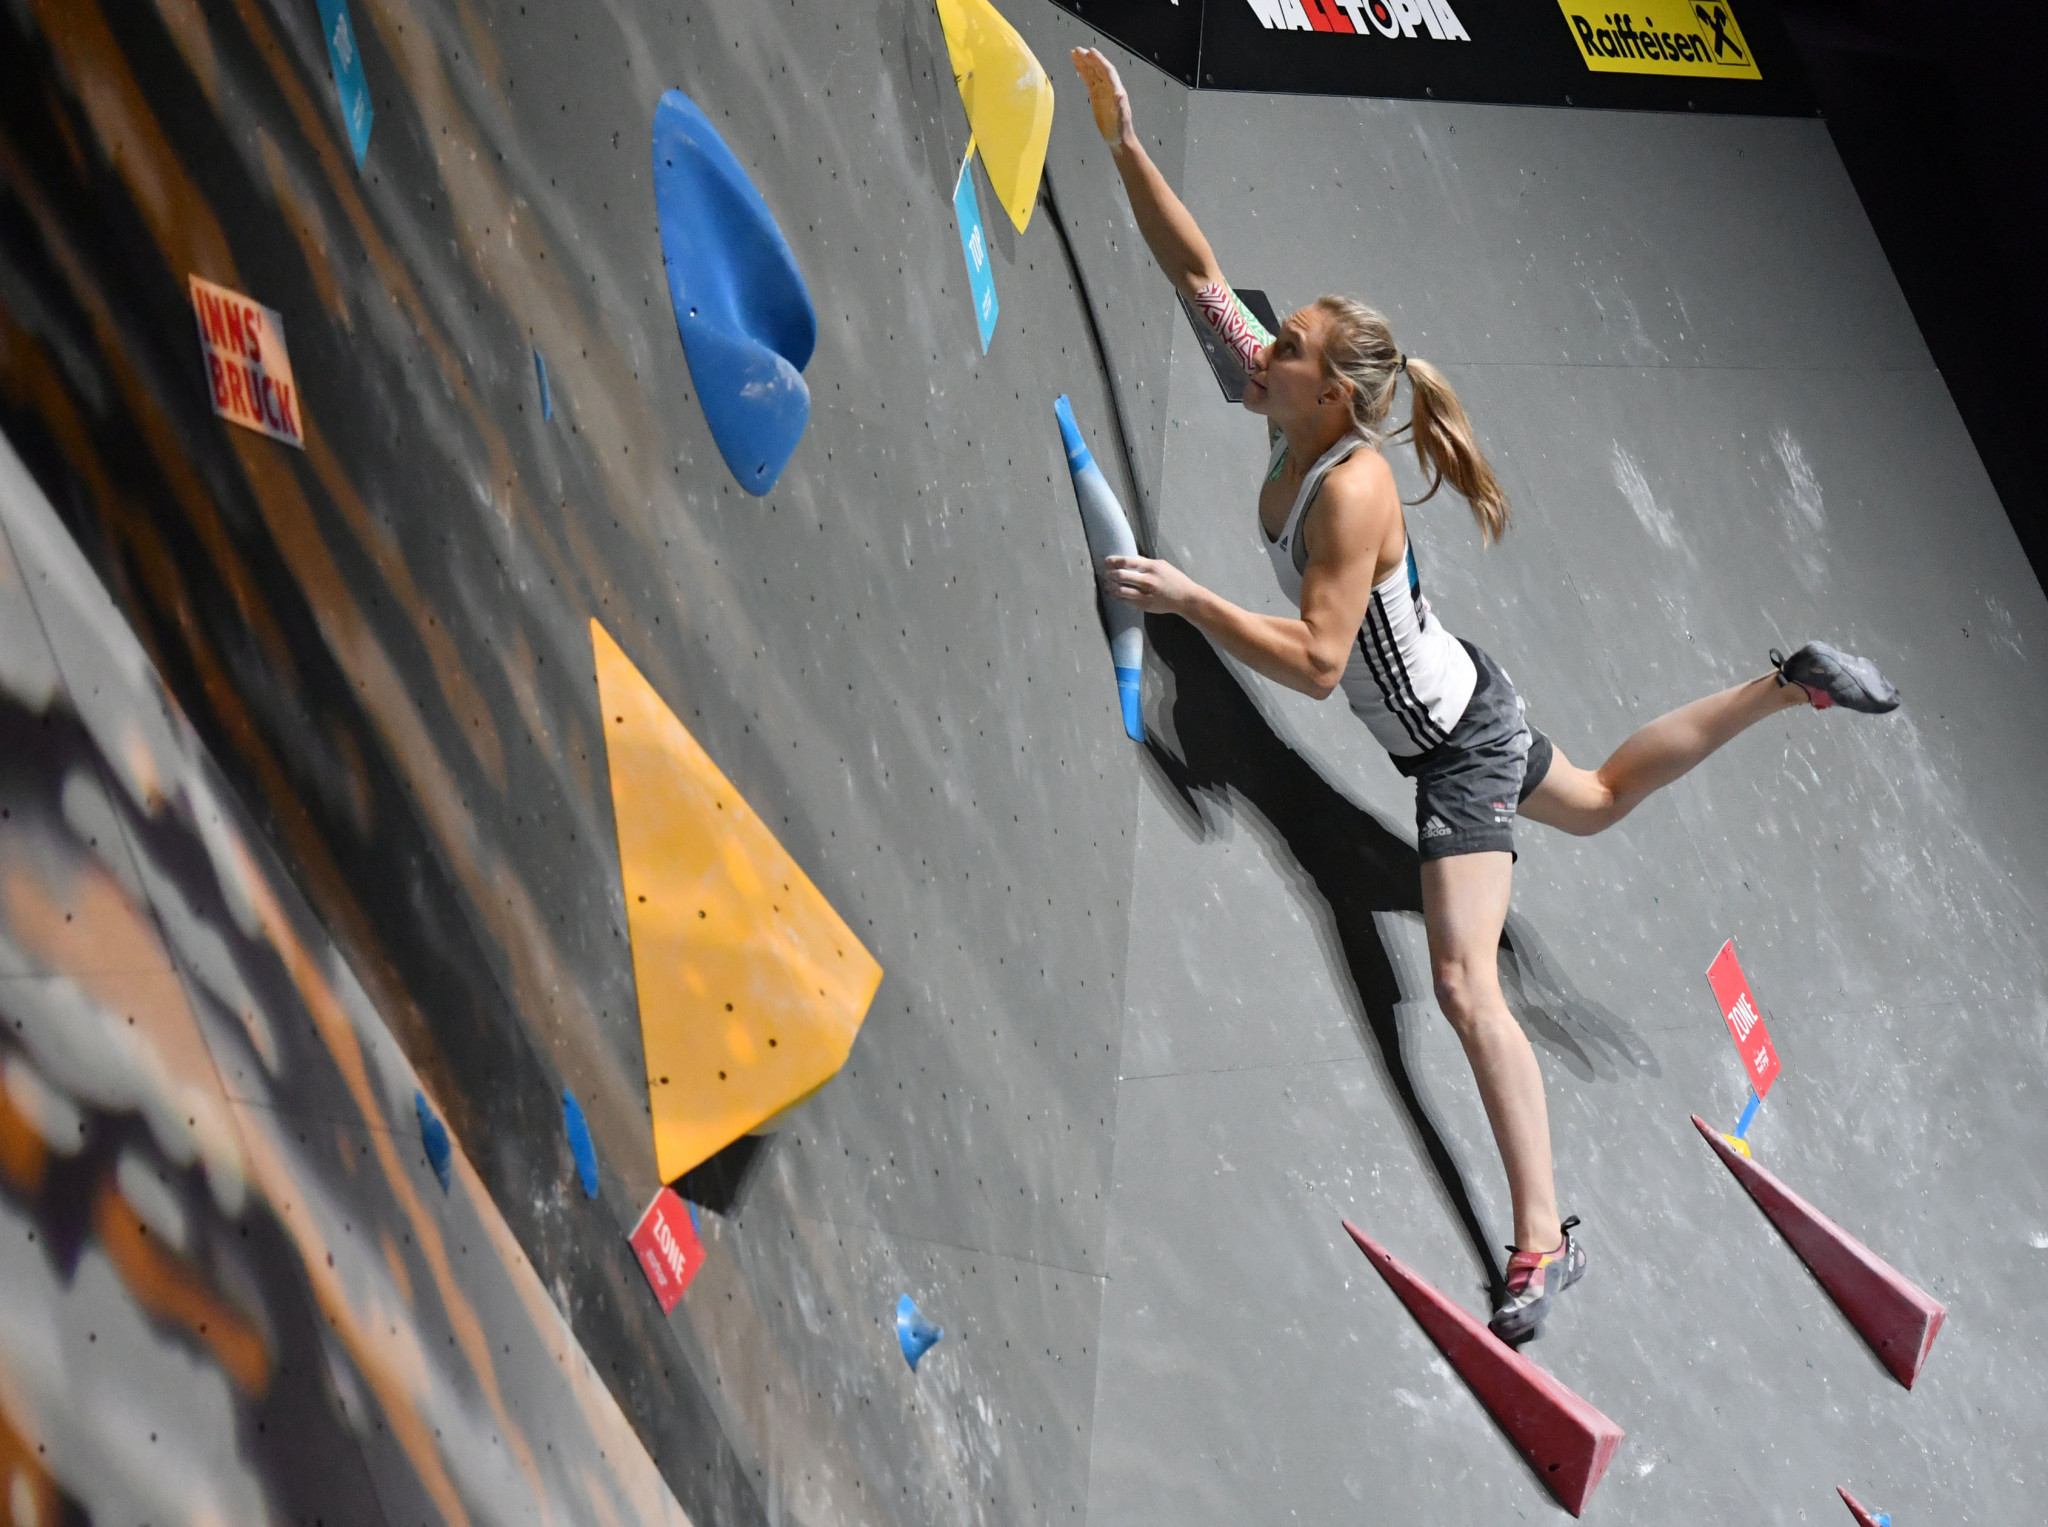 Janja Garnbret will seek a fourth consecutive IFSC Bouldering World Cup title in China tomorrow ©Getty Images